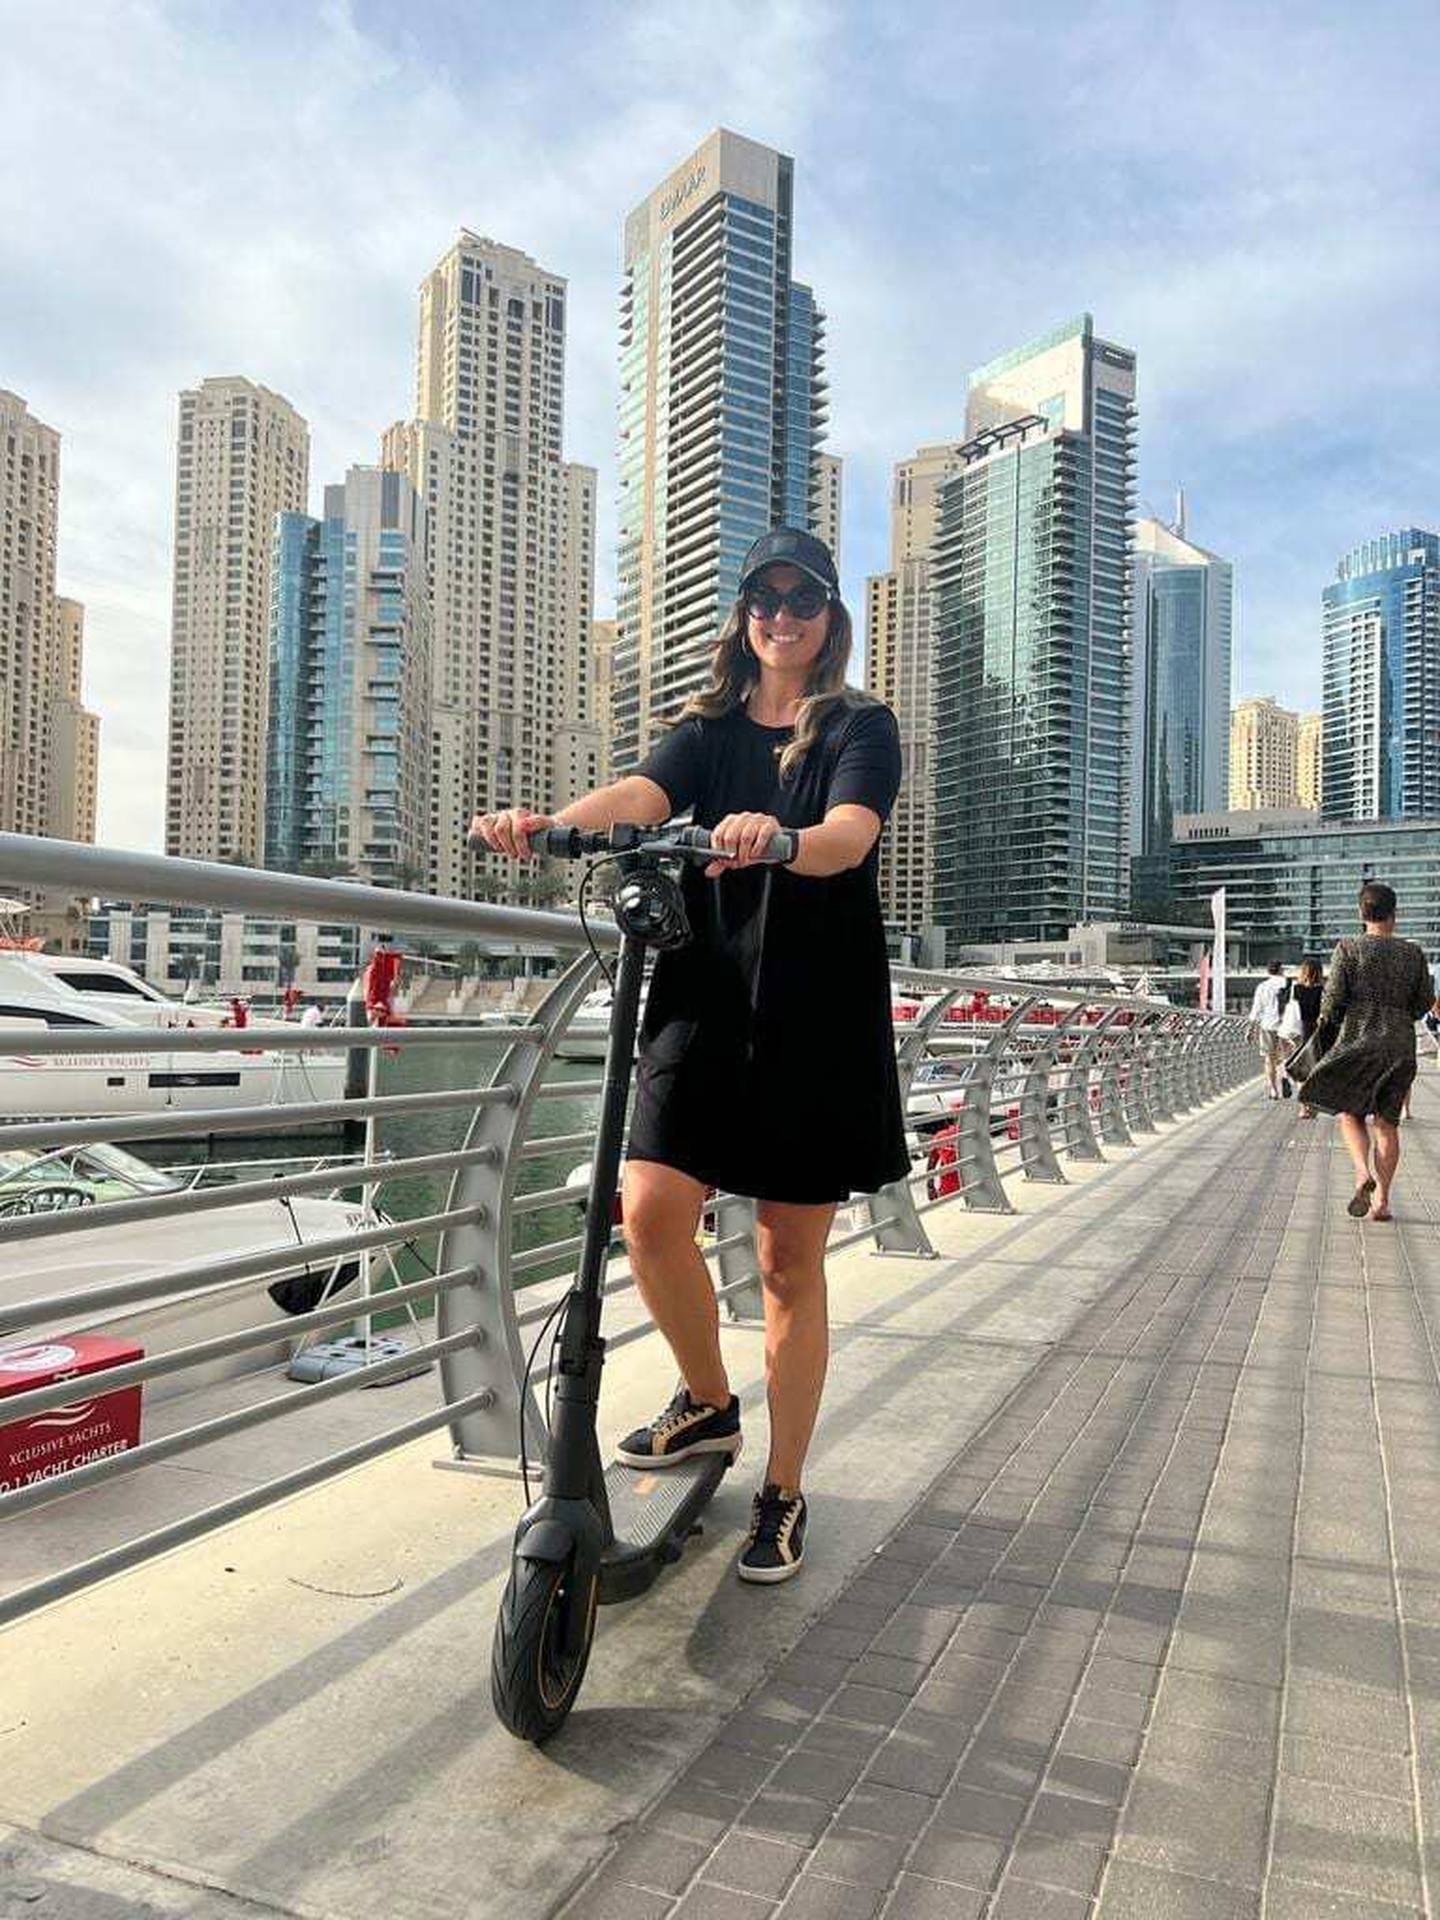 Alexis Sworder, 40, bought an e-scooter two years ago, and said it allowed her to avoid traffic congestion at busy times, and for her partner to use their shared car.